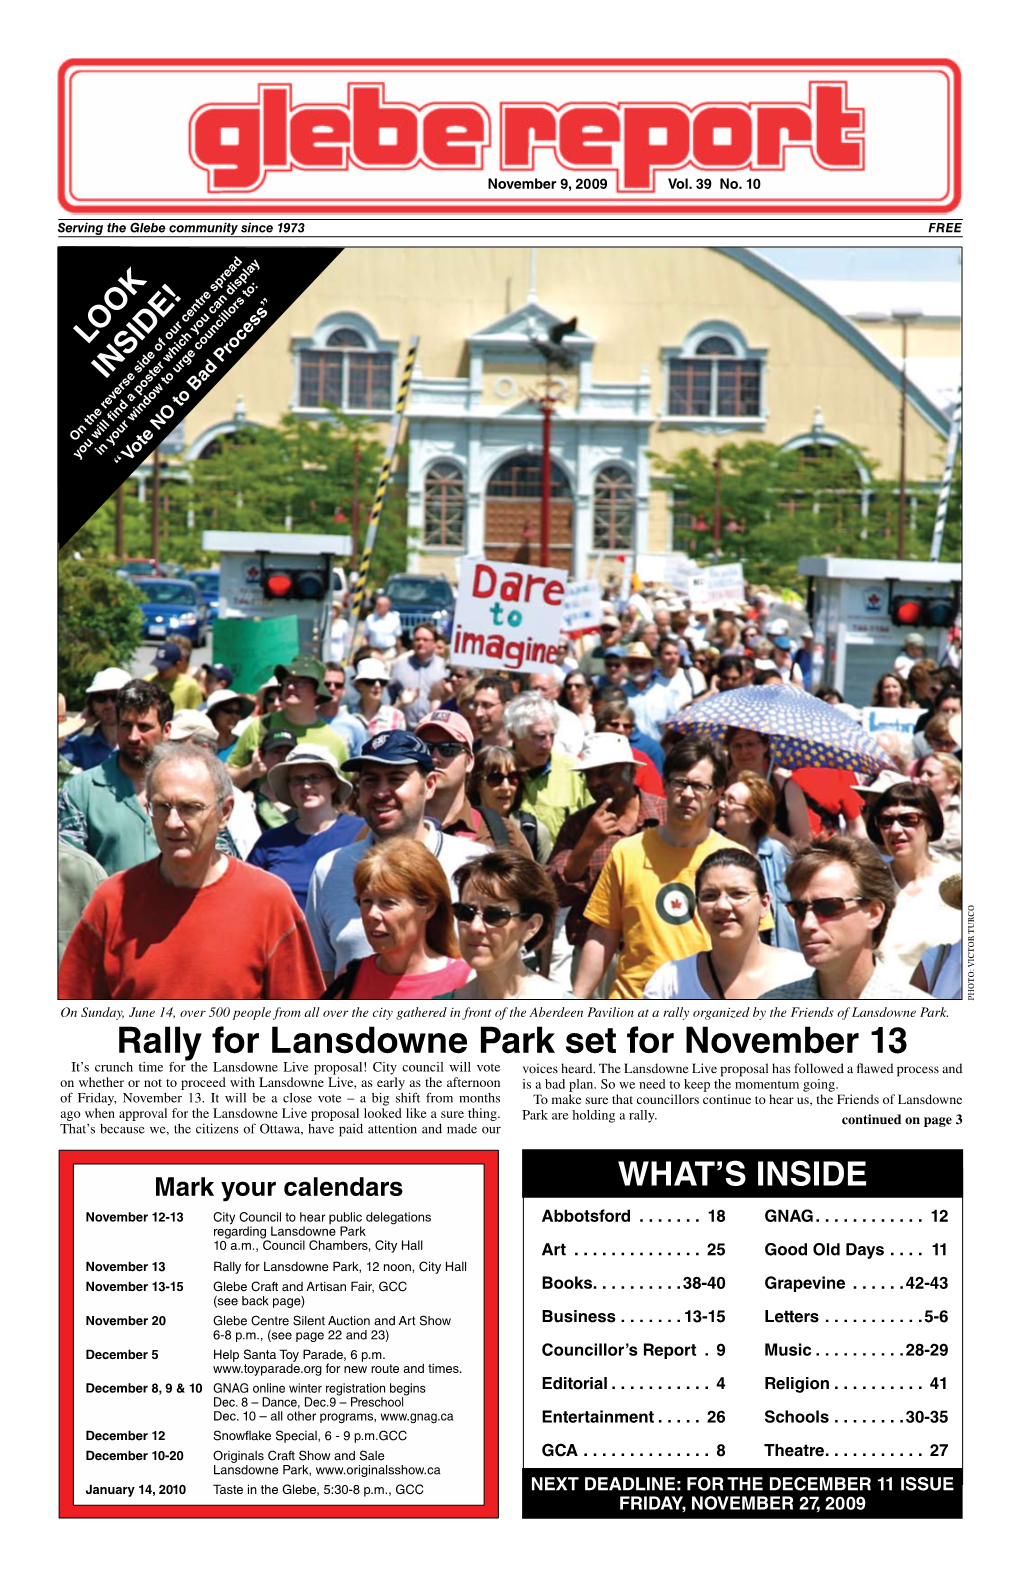 Rally for Lansdowne Park Set for November 13 It’S Crunch Time for the Lansdowne Live Proposal! City Council Will Vote Voices Heard